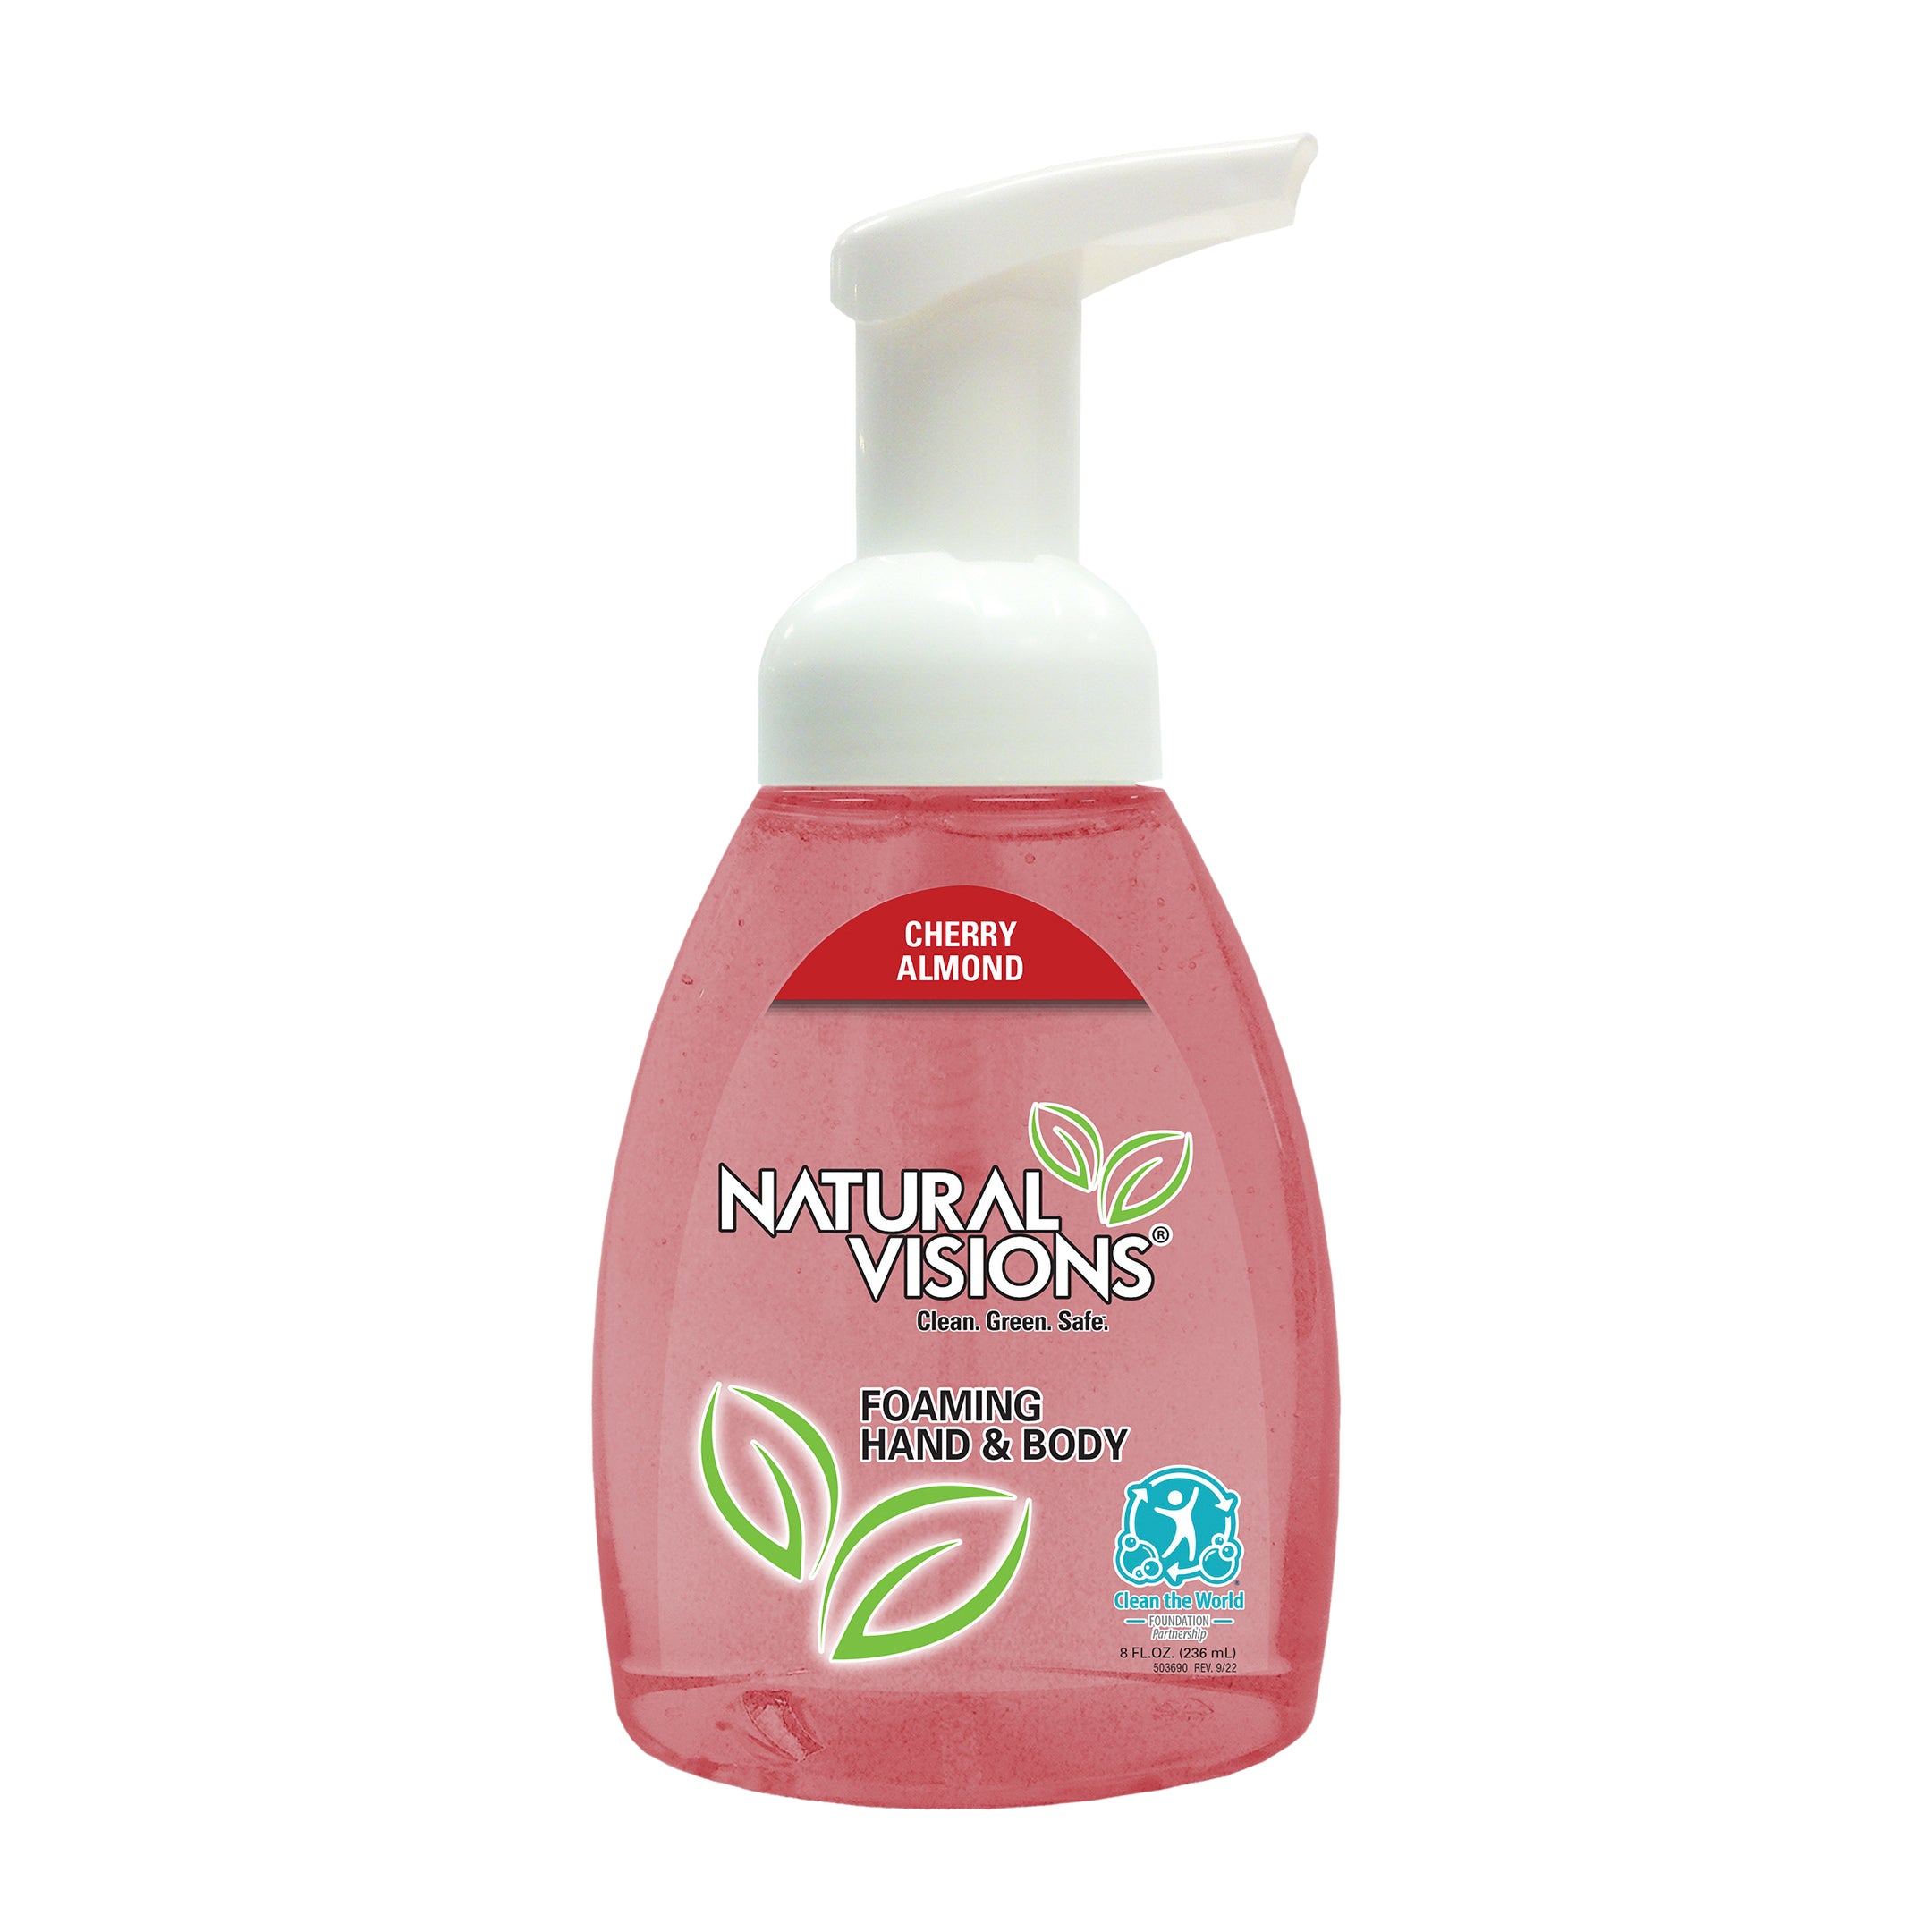 Natural Visions Cherry Almond Foaming Hand & Body Soap - 8oz/6pk